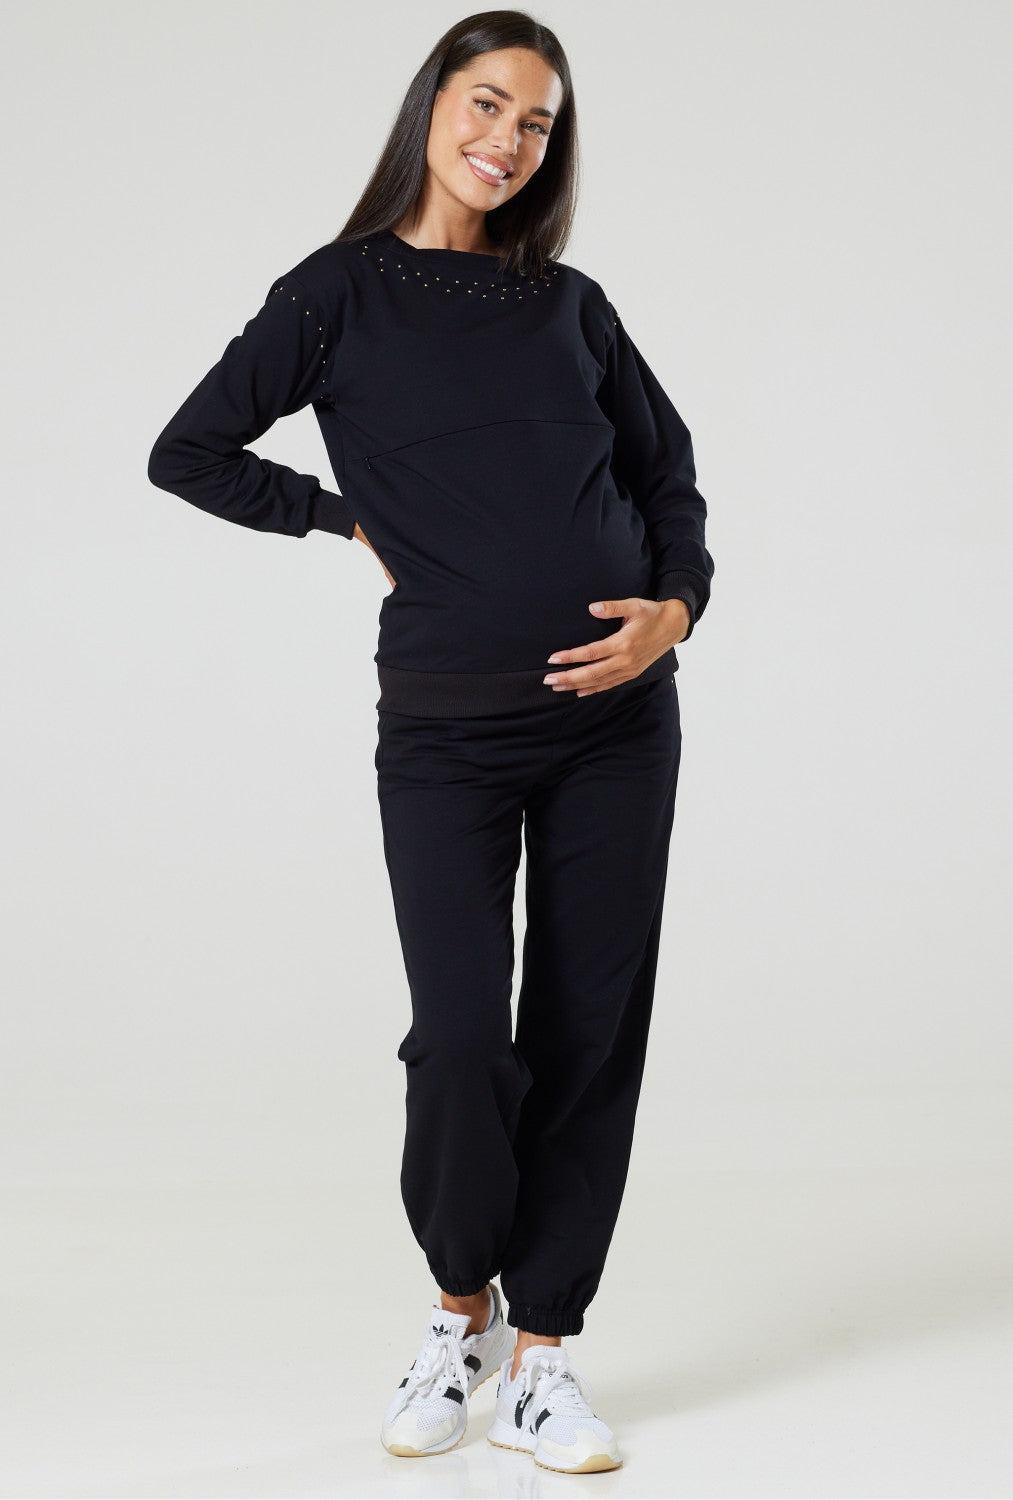 Maternity Tracksuit with Gold Metal Studds